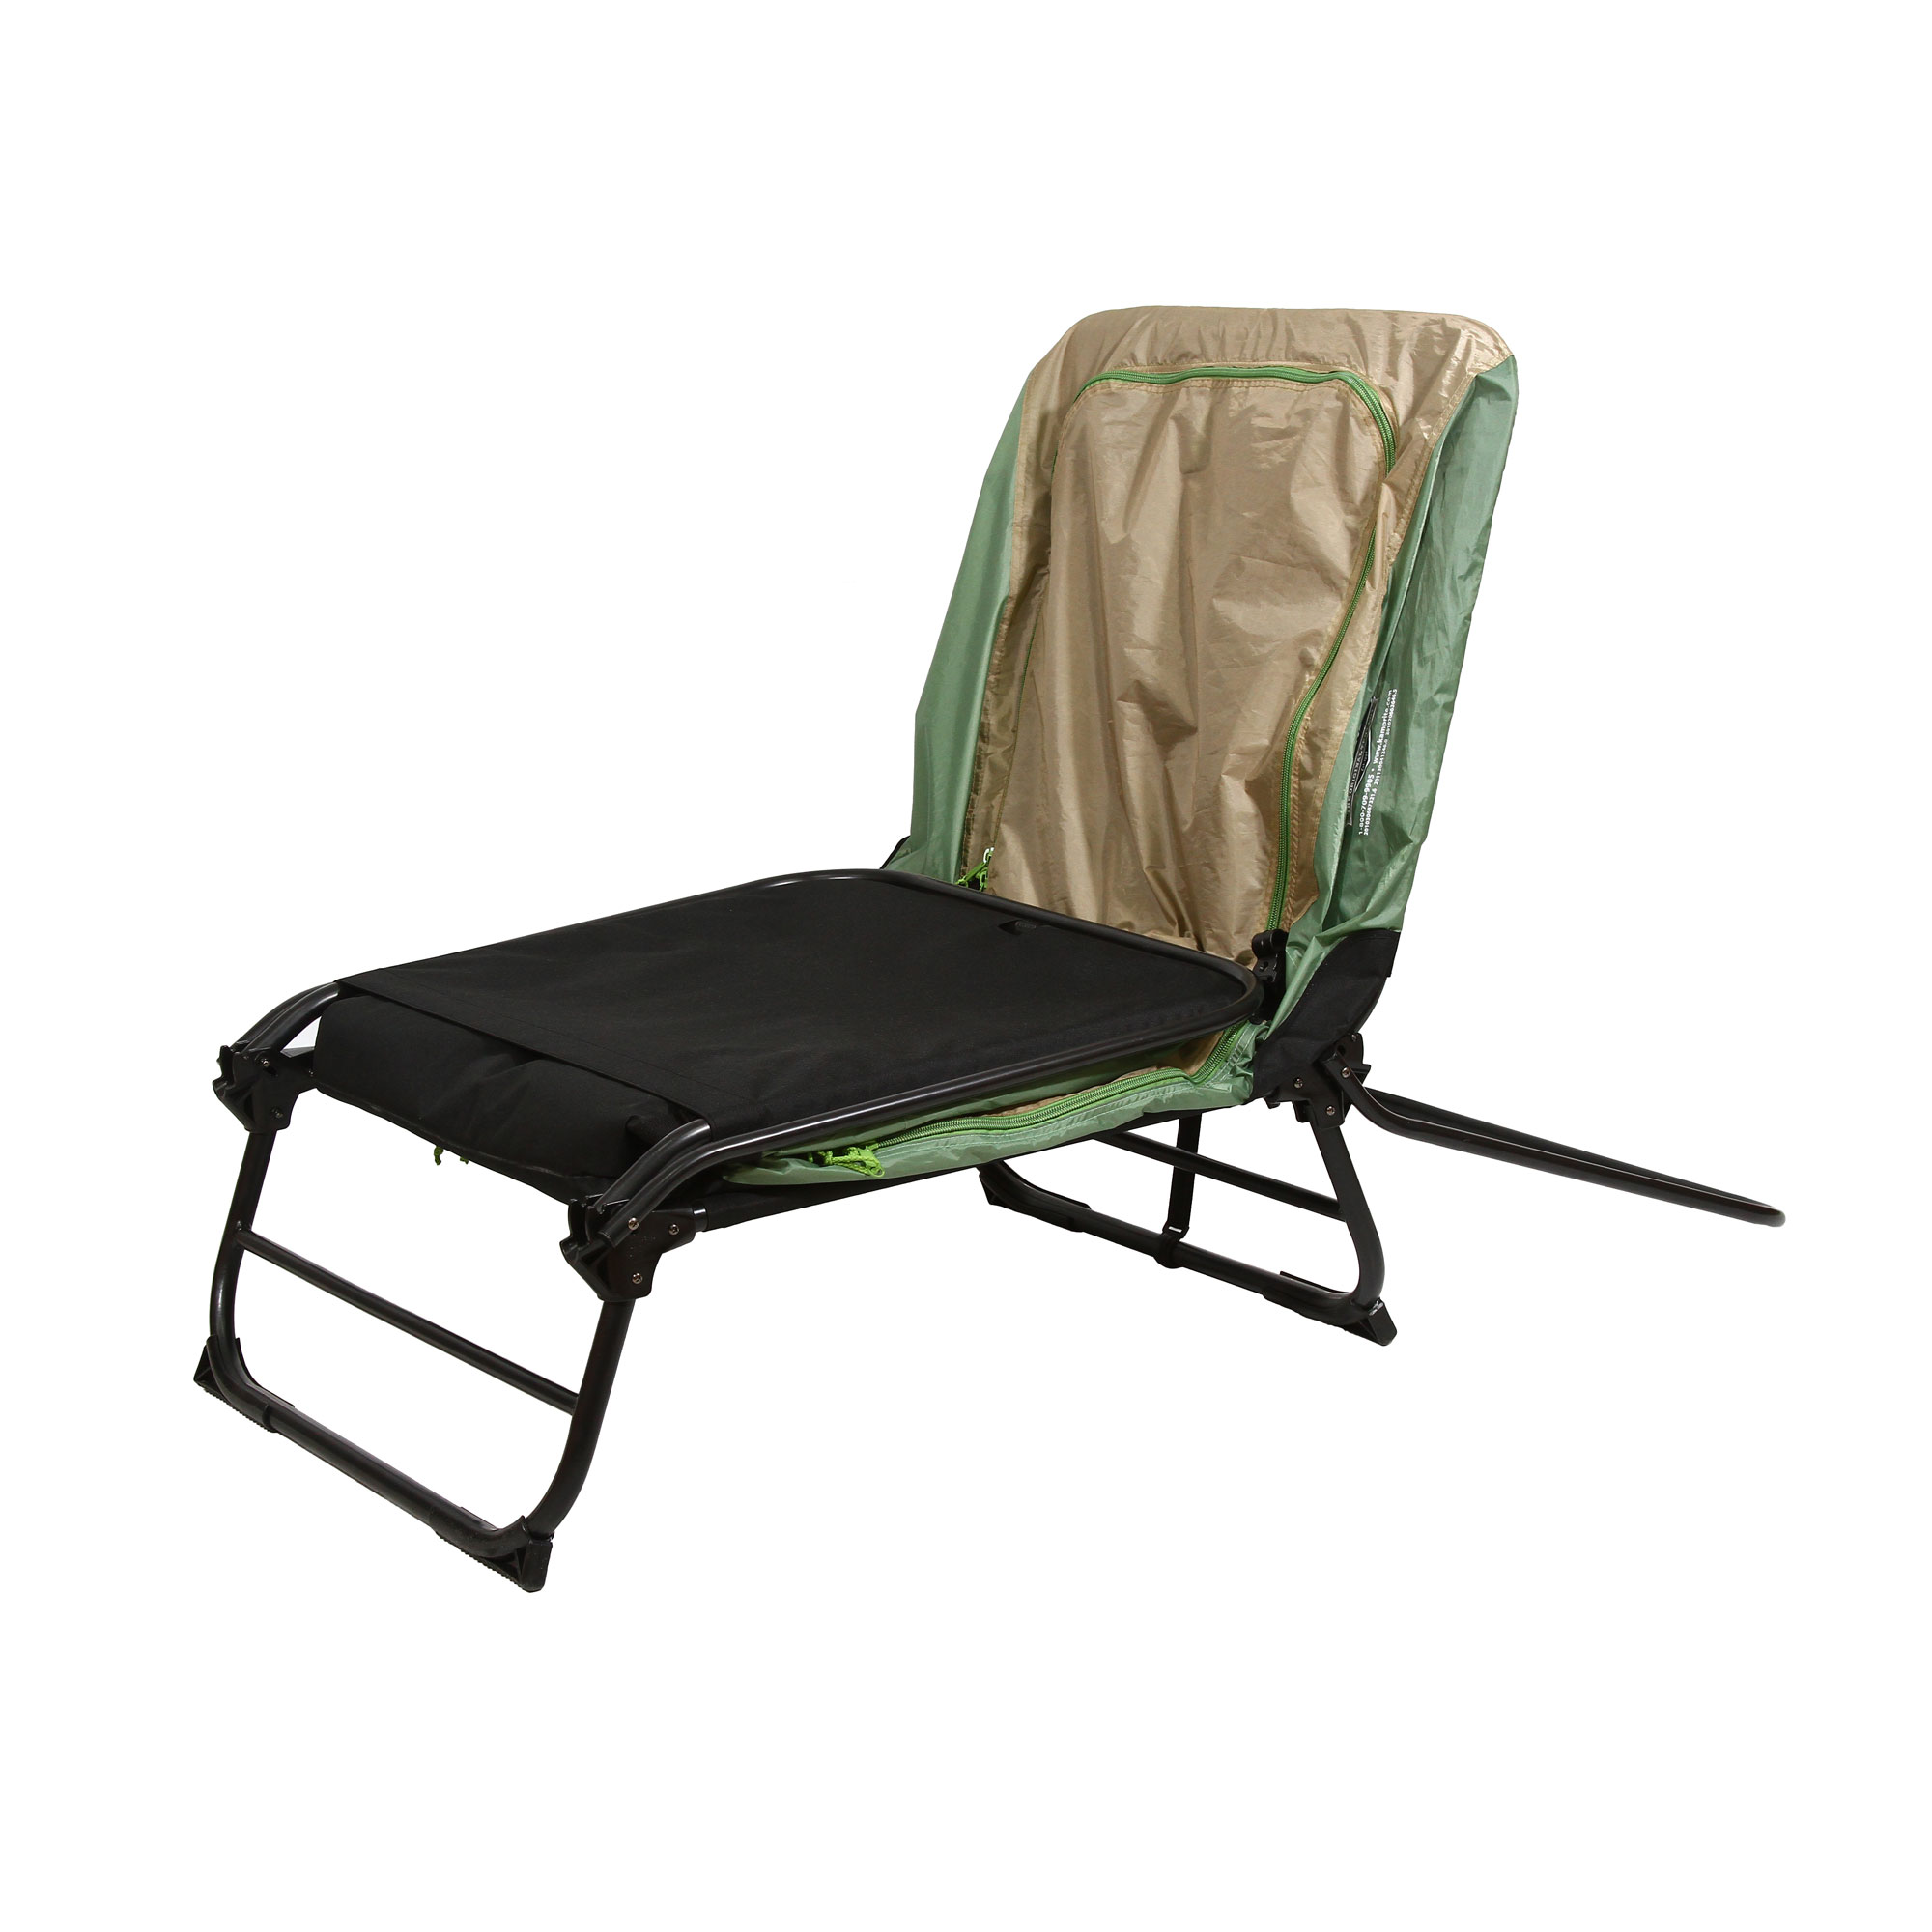 Kamp-Rite Original Tent Cot Folding Camping and Hiking Bed 1 Person (Open Box) - image 4 of 9